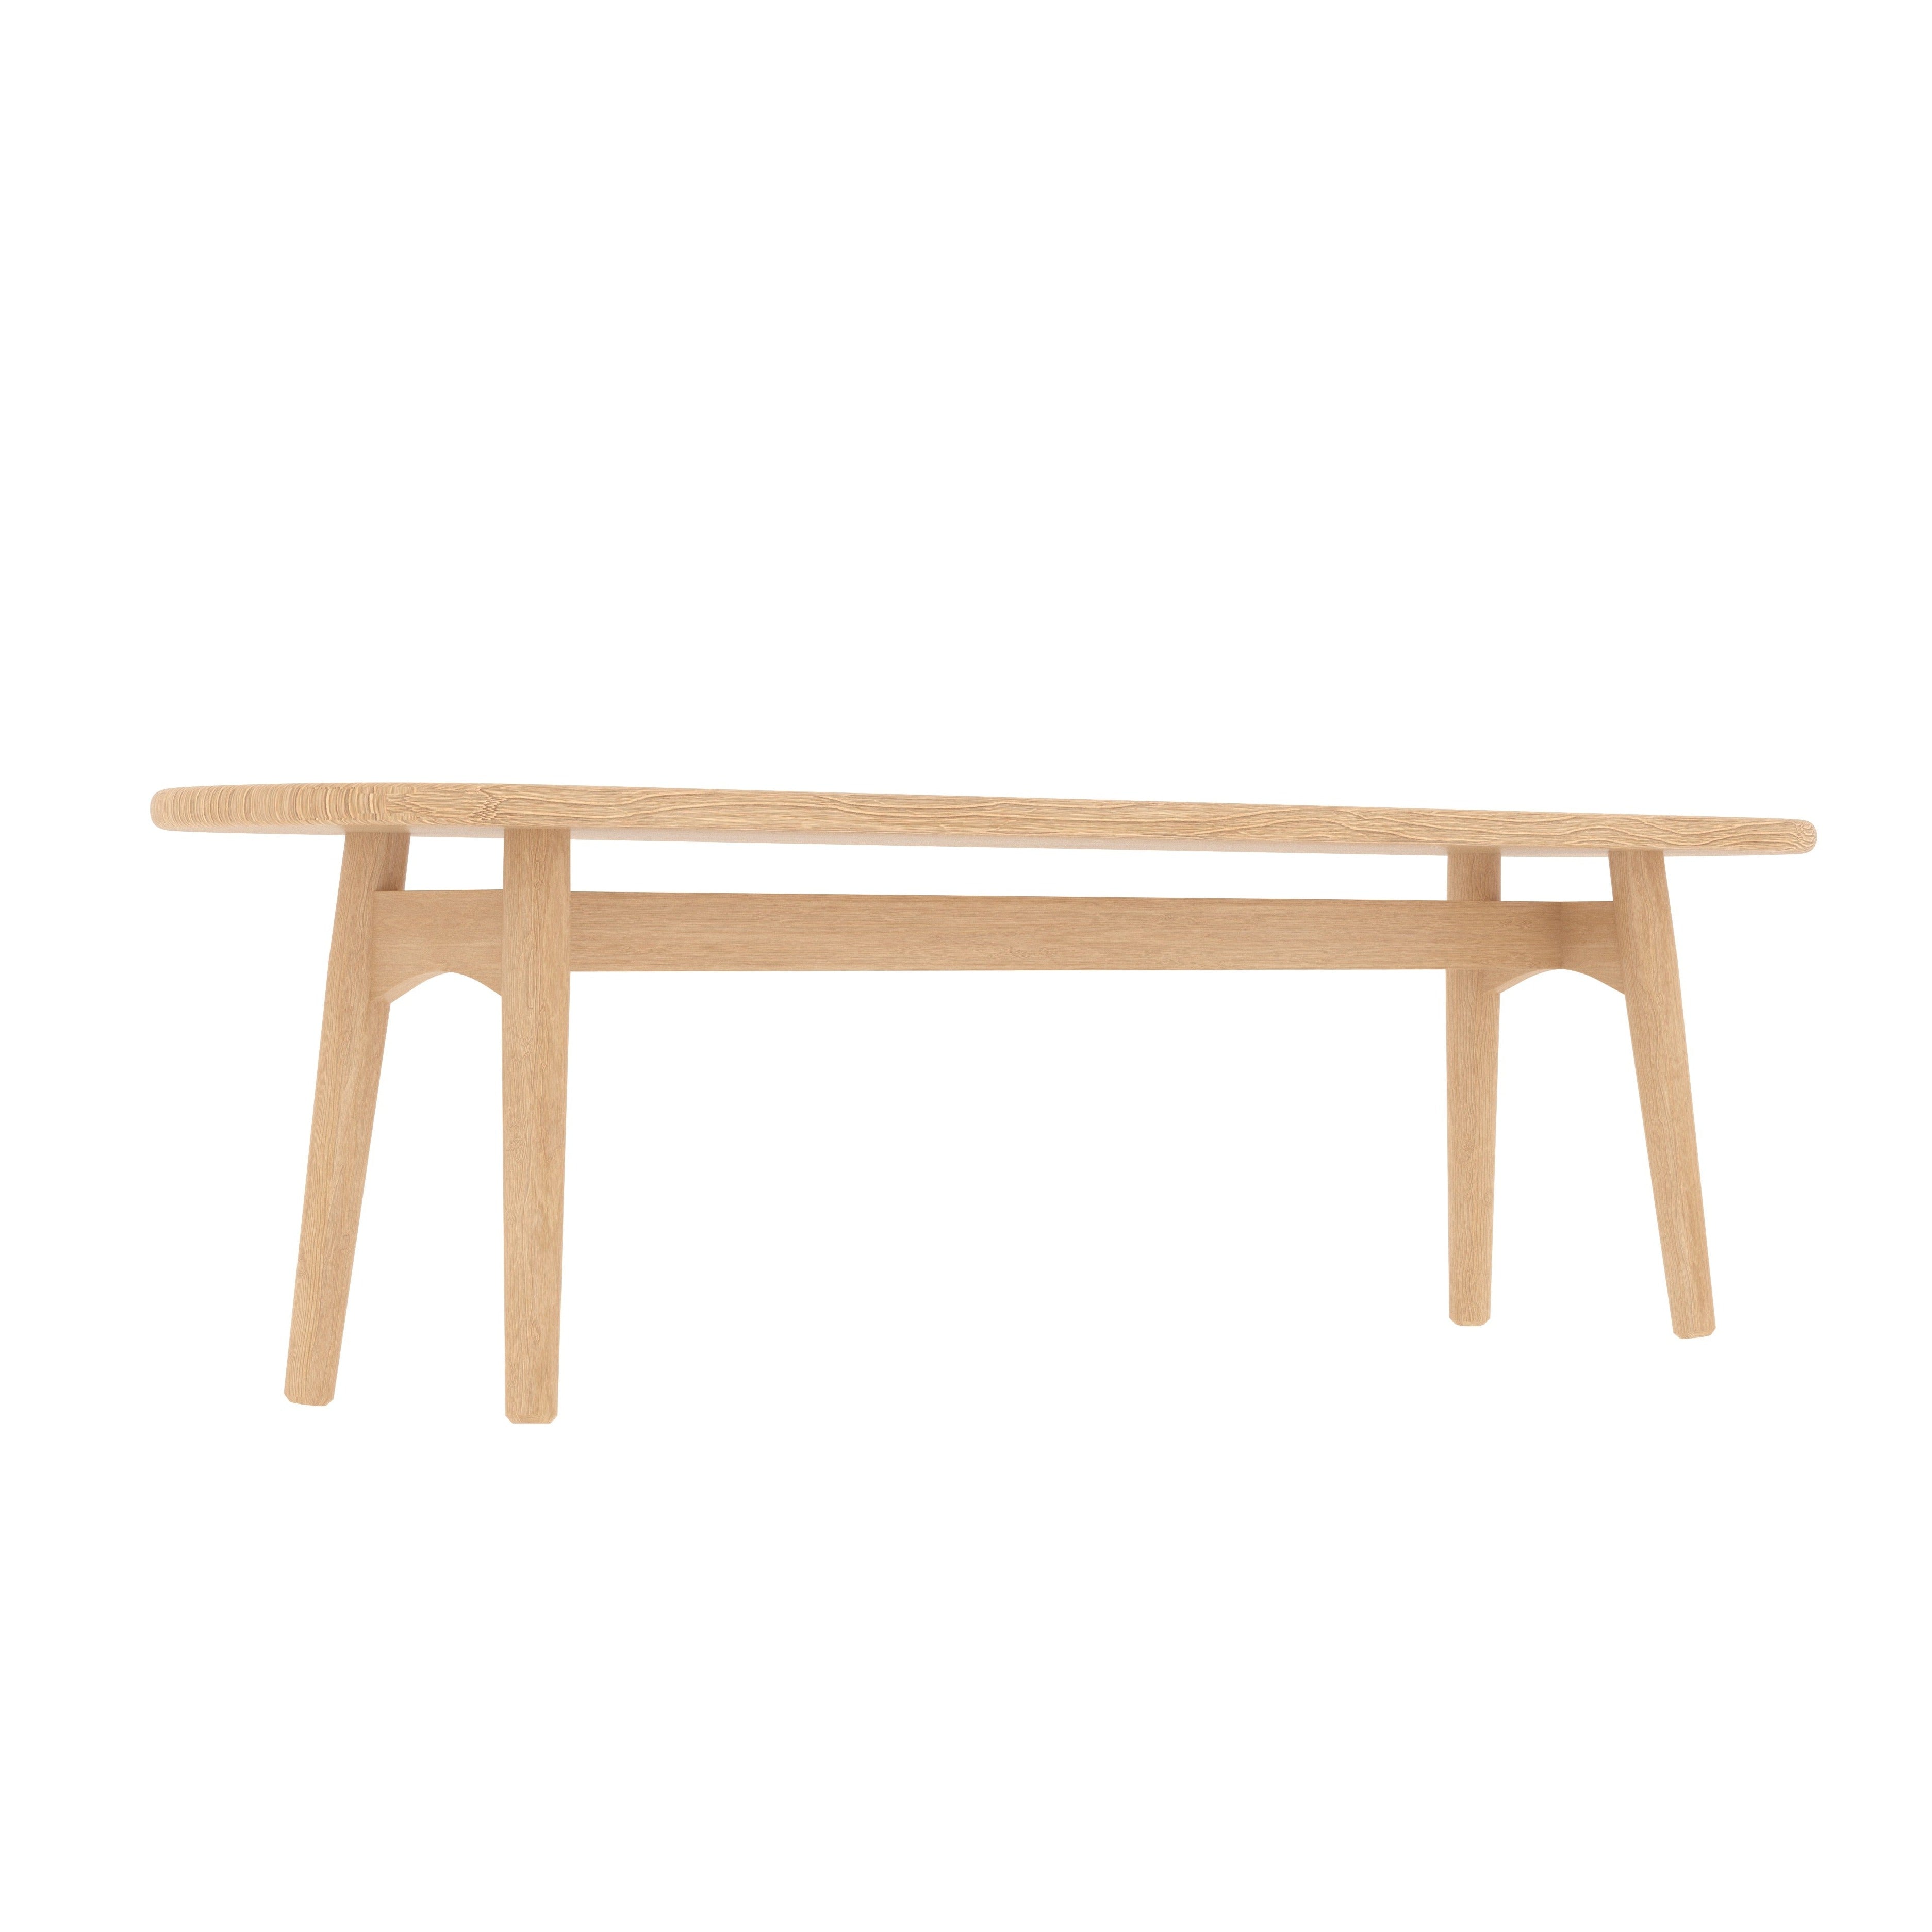 Oak Wood Bench With a Rounded Corner Top, Bench